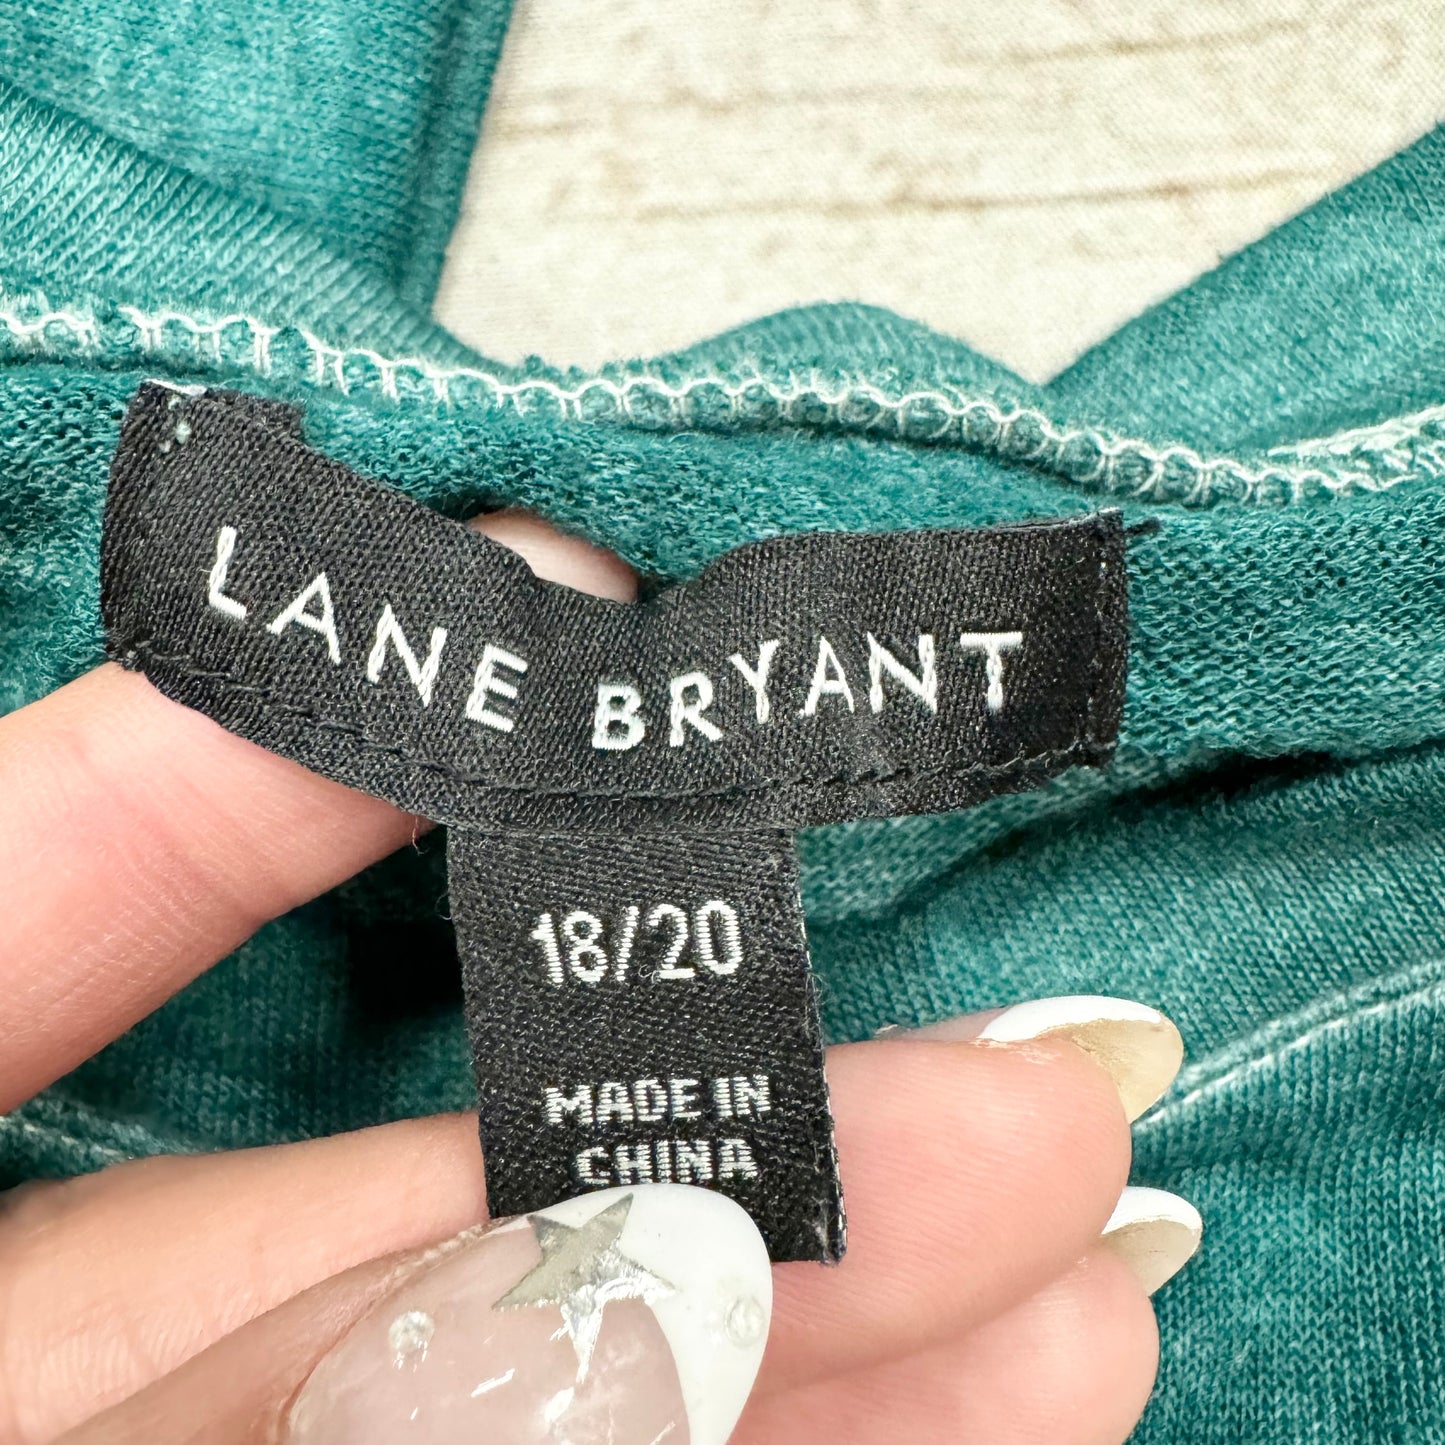 Top Long Sleeve By Lane Bryant  Size: 1x